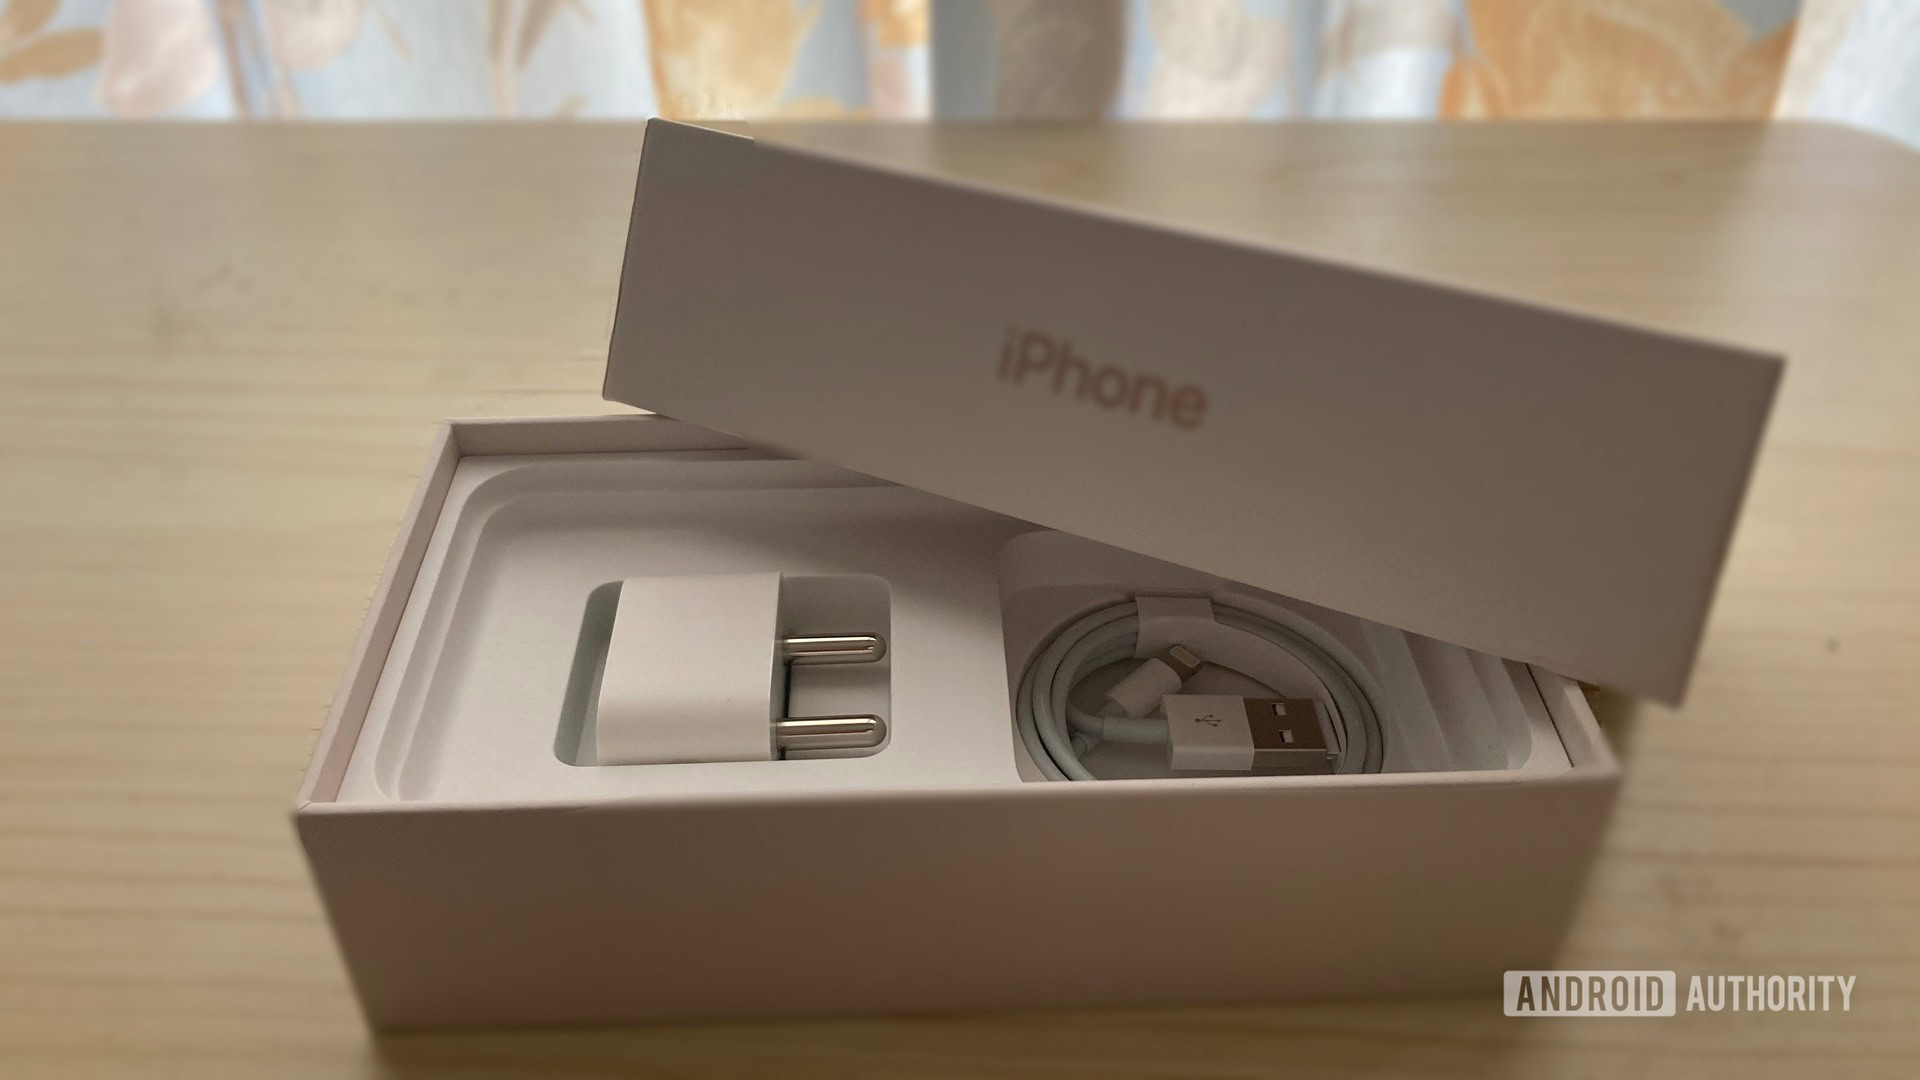 Apple is only providing a charging cable in the box for the iPhone 12 